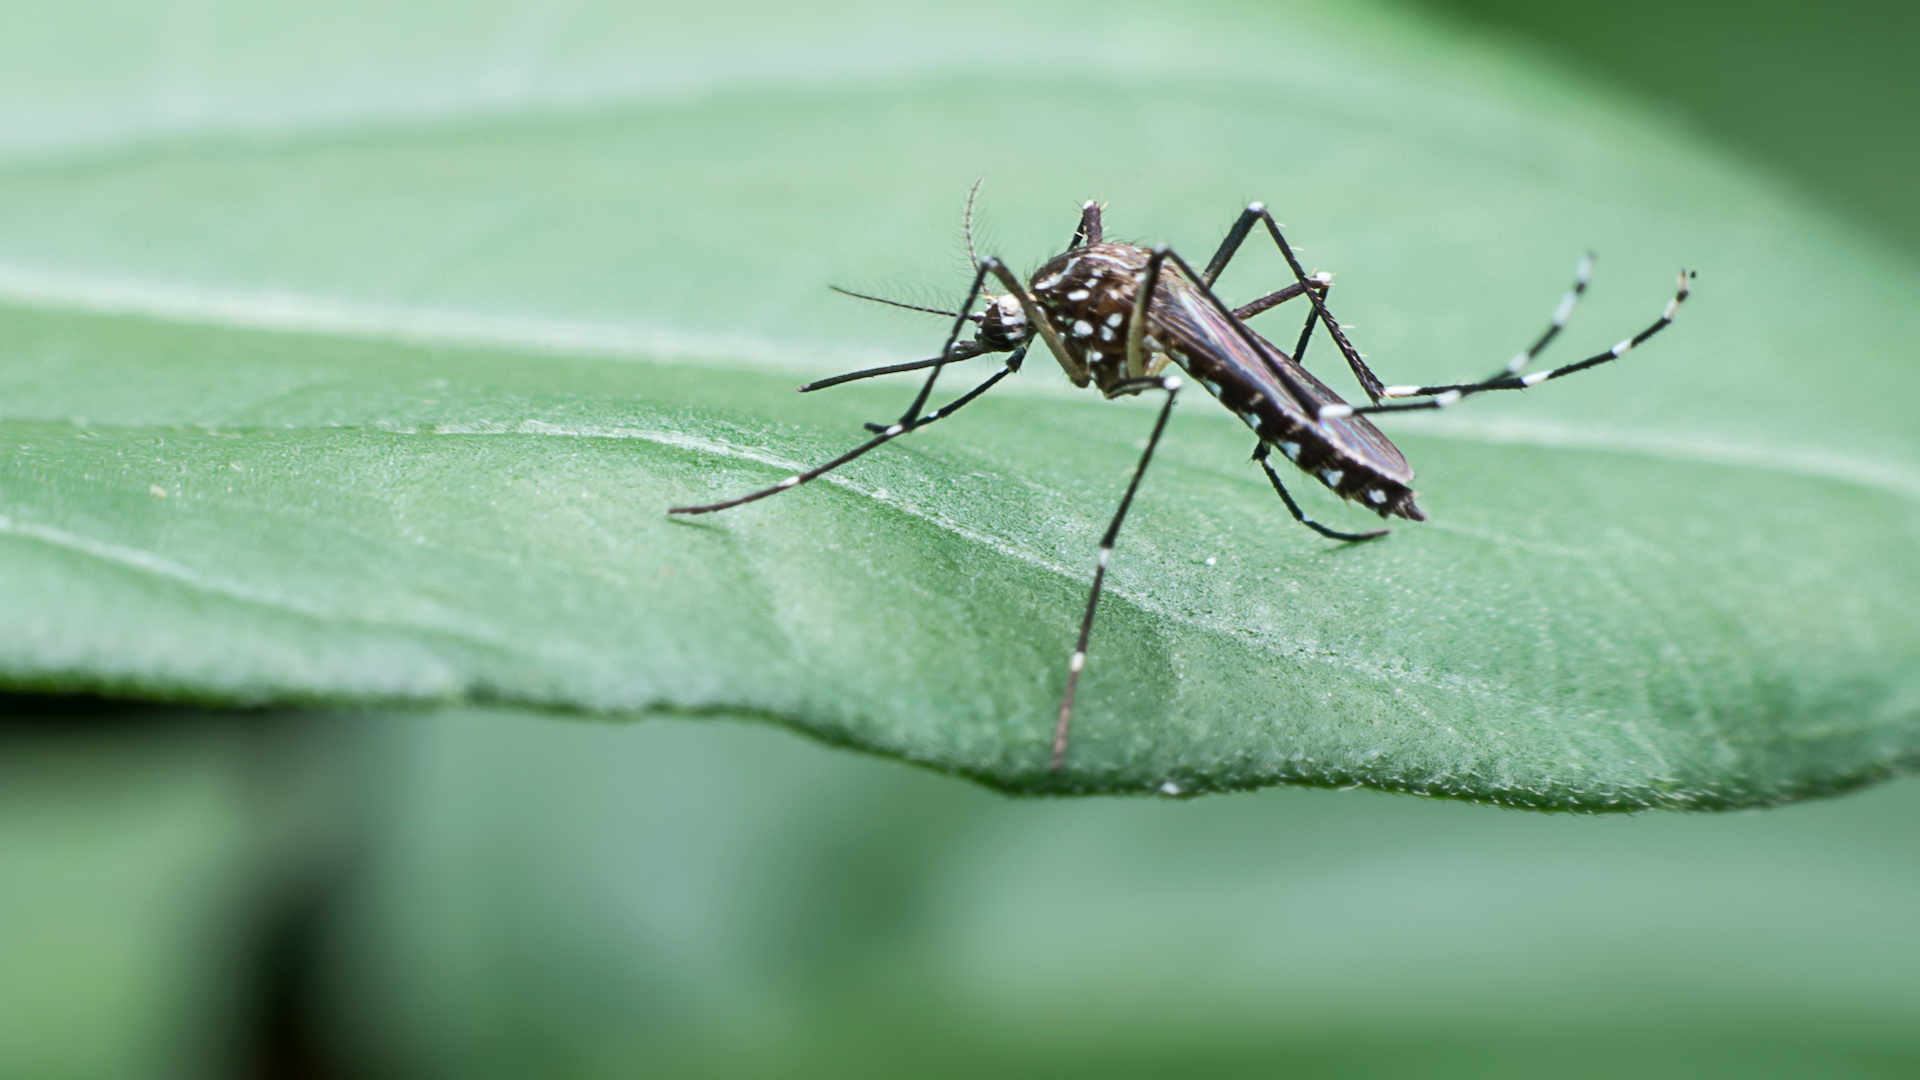 Did You Know June Is Mosquito Awareness Month? Here’s Why It’s Important